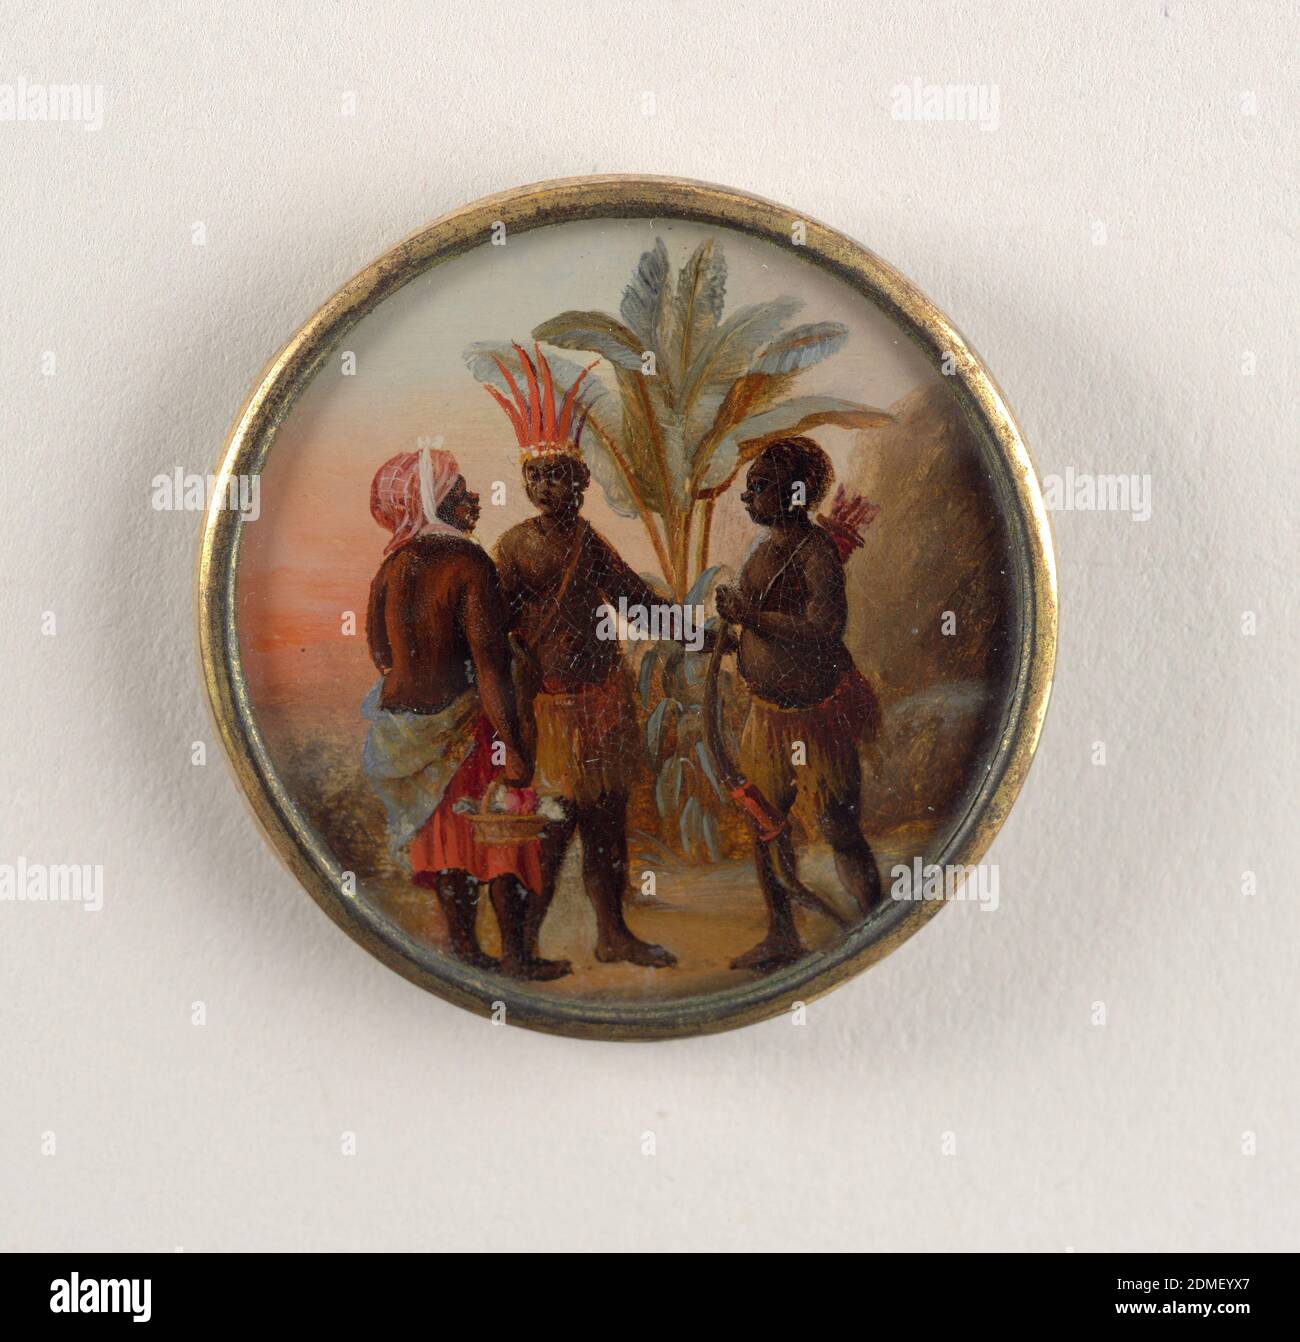 Button, Gouache paint on tin verre fixé, ivory (backing), glass, gilt metal, Button depicting scene with three figures in a palm tree-filled landscape conversing. Two men wear native West Indies garments of skirts; one wears a red feathered crown; the other holds a bow and carries a quiver of arrows on his back. Woman on the left wears a Western skirt with no shirt and a red scarf on head; her back is towards the viewer and she carries a basket of flowers., late 18th century, costume & accessories, Decorative Arts, Button Stock Photo